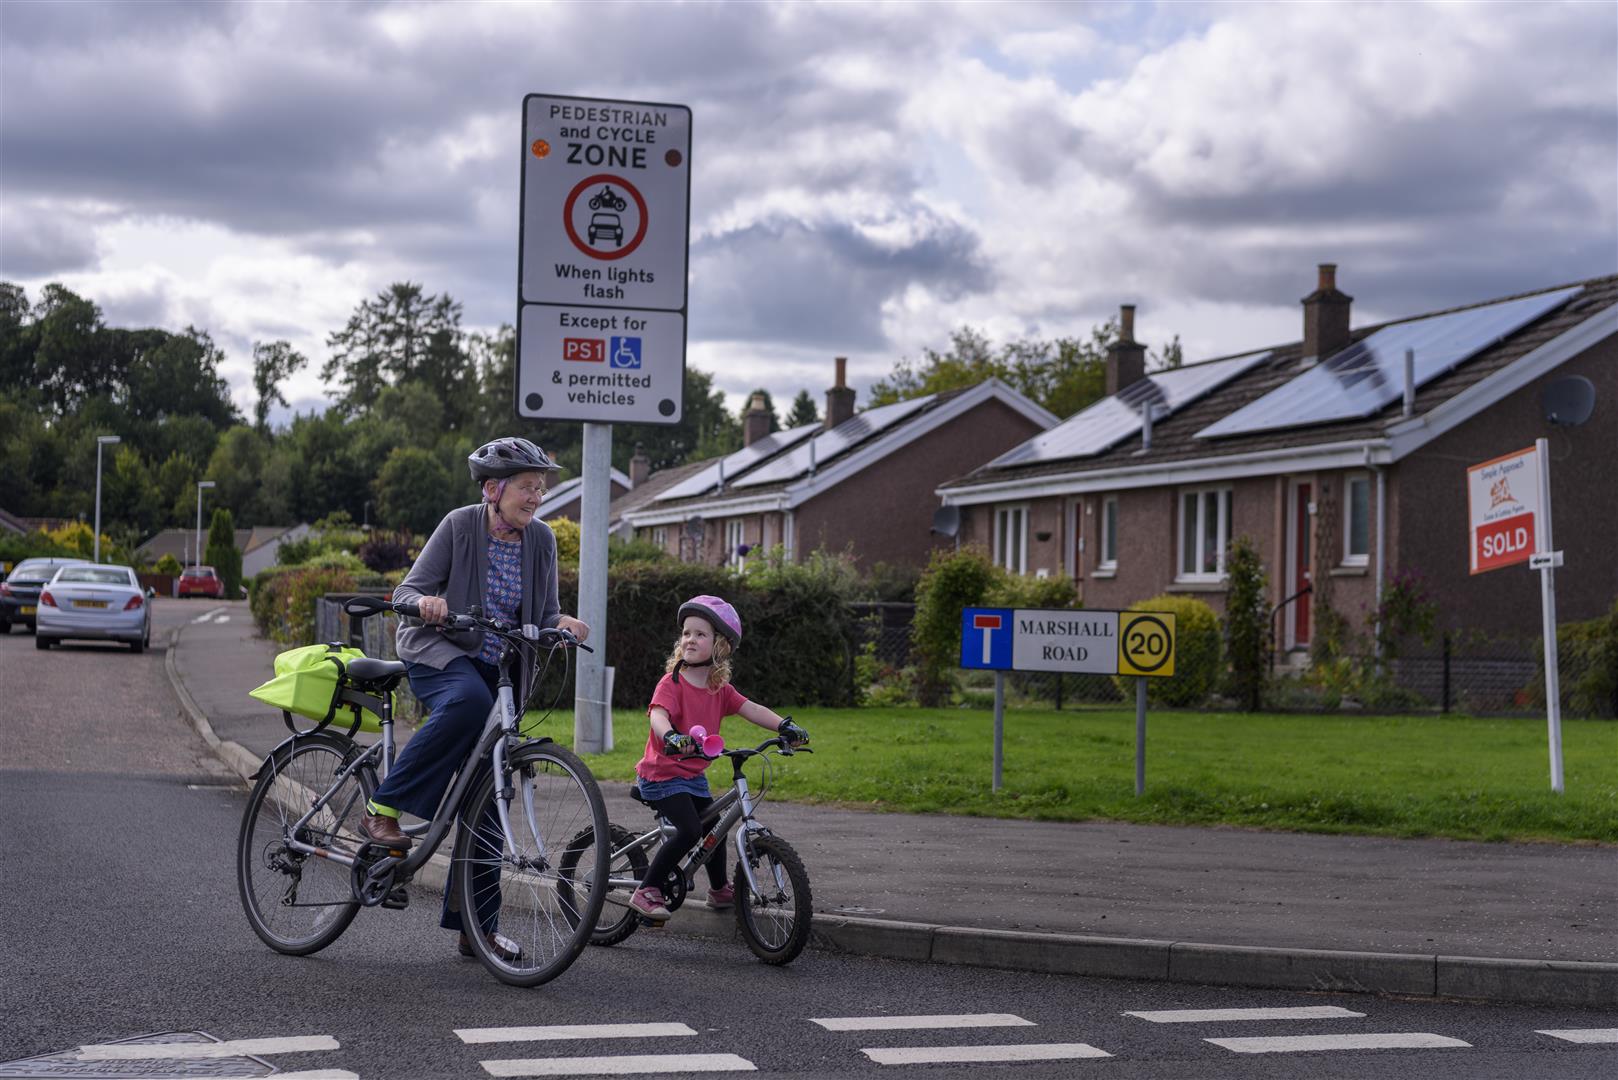 Picture of an elderly person and child on pedal bikes in a residential neighbourhood which is a 20 mph pedestrian and cycle zone. 